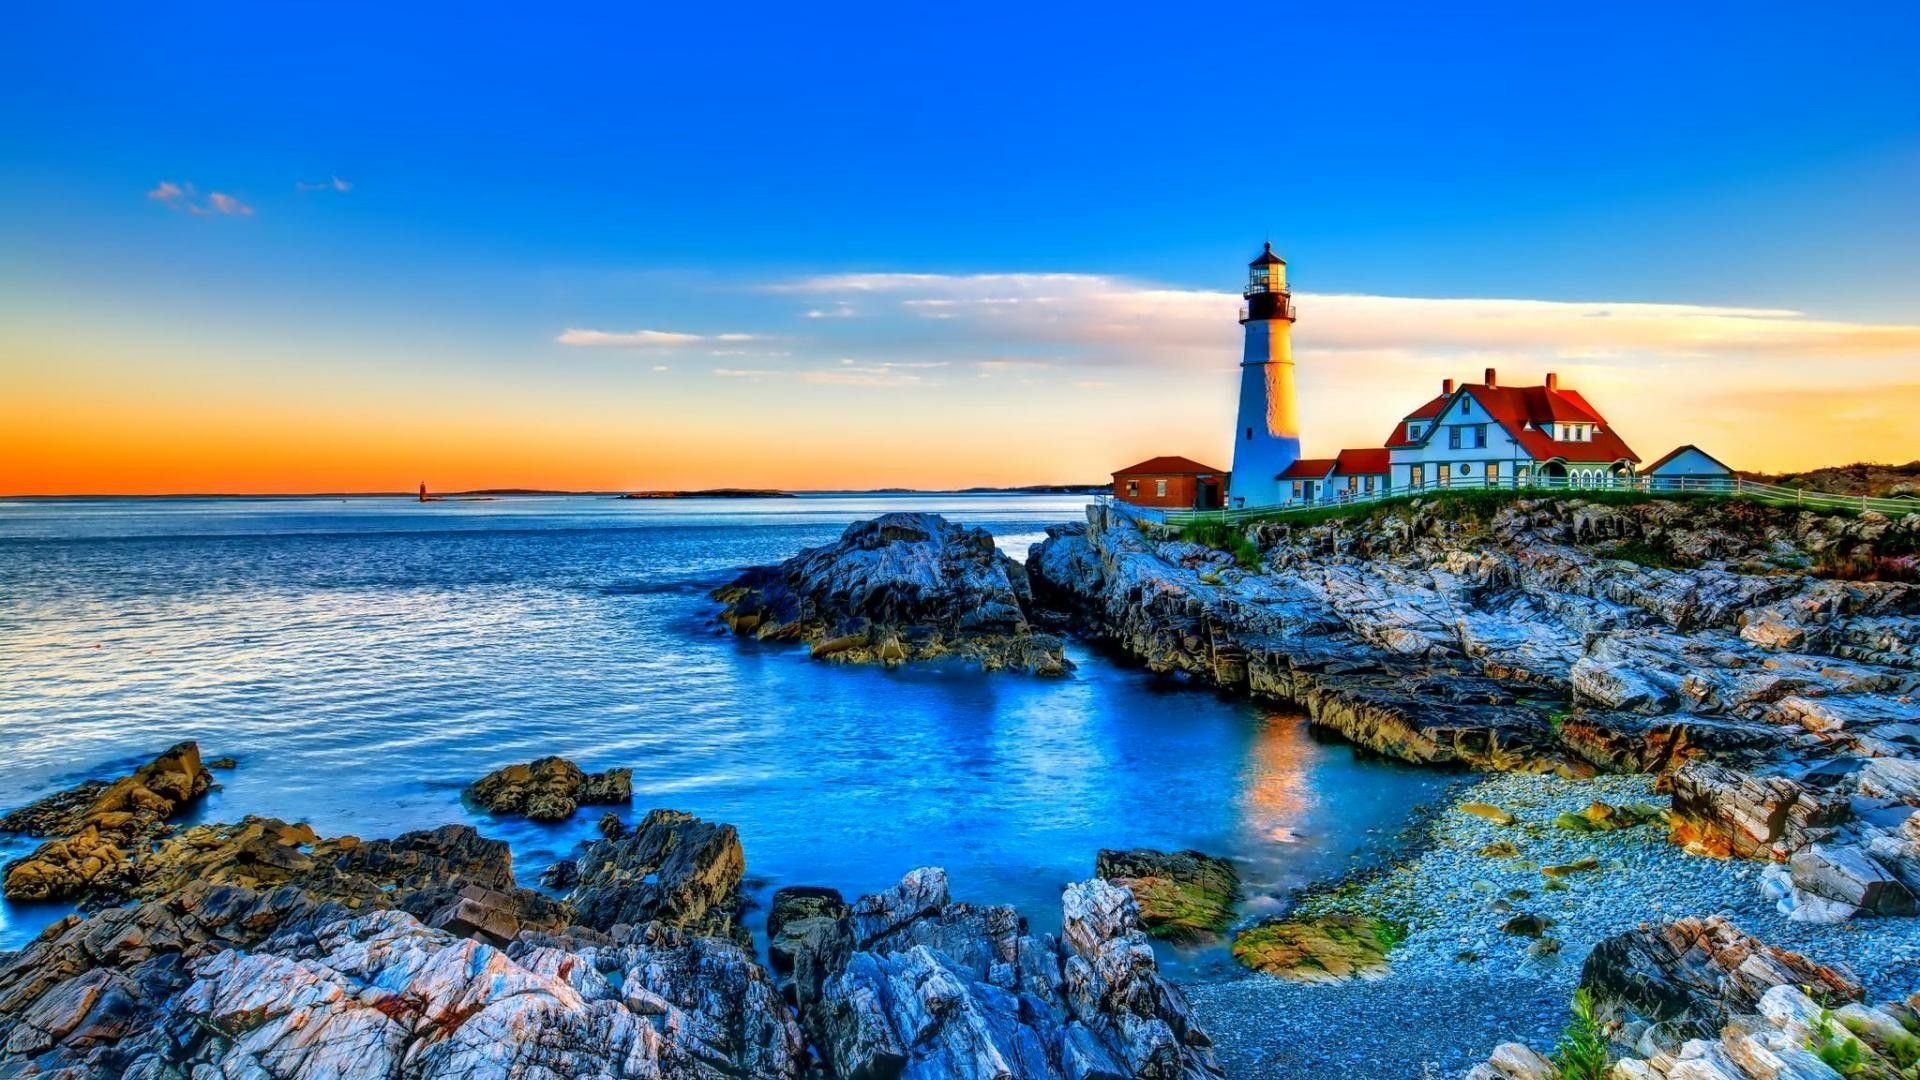 Maine travels, Maine HD wallpapers, Free backgrounds, 1920x1080 Full HD Desktop